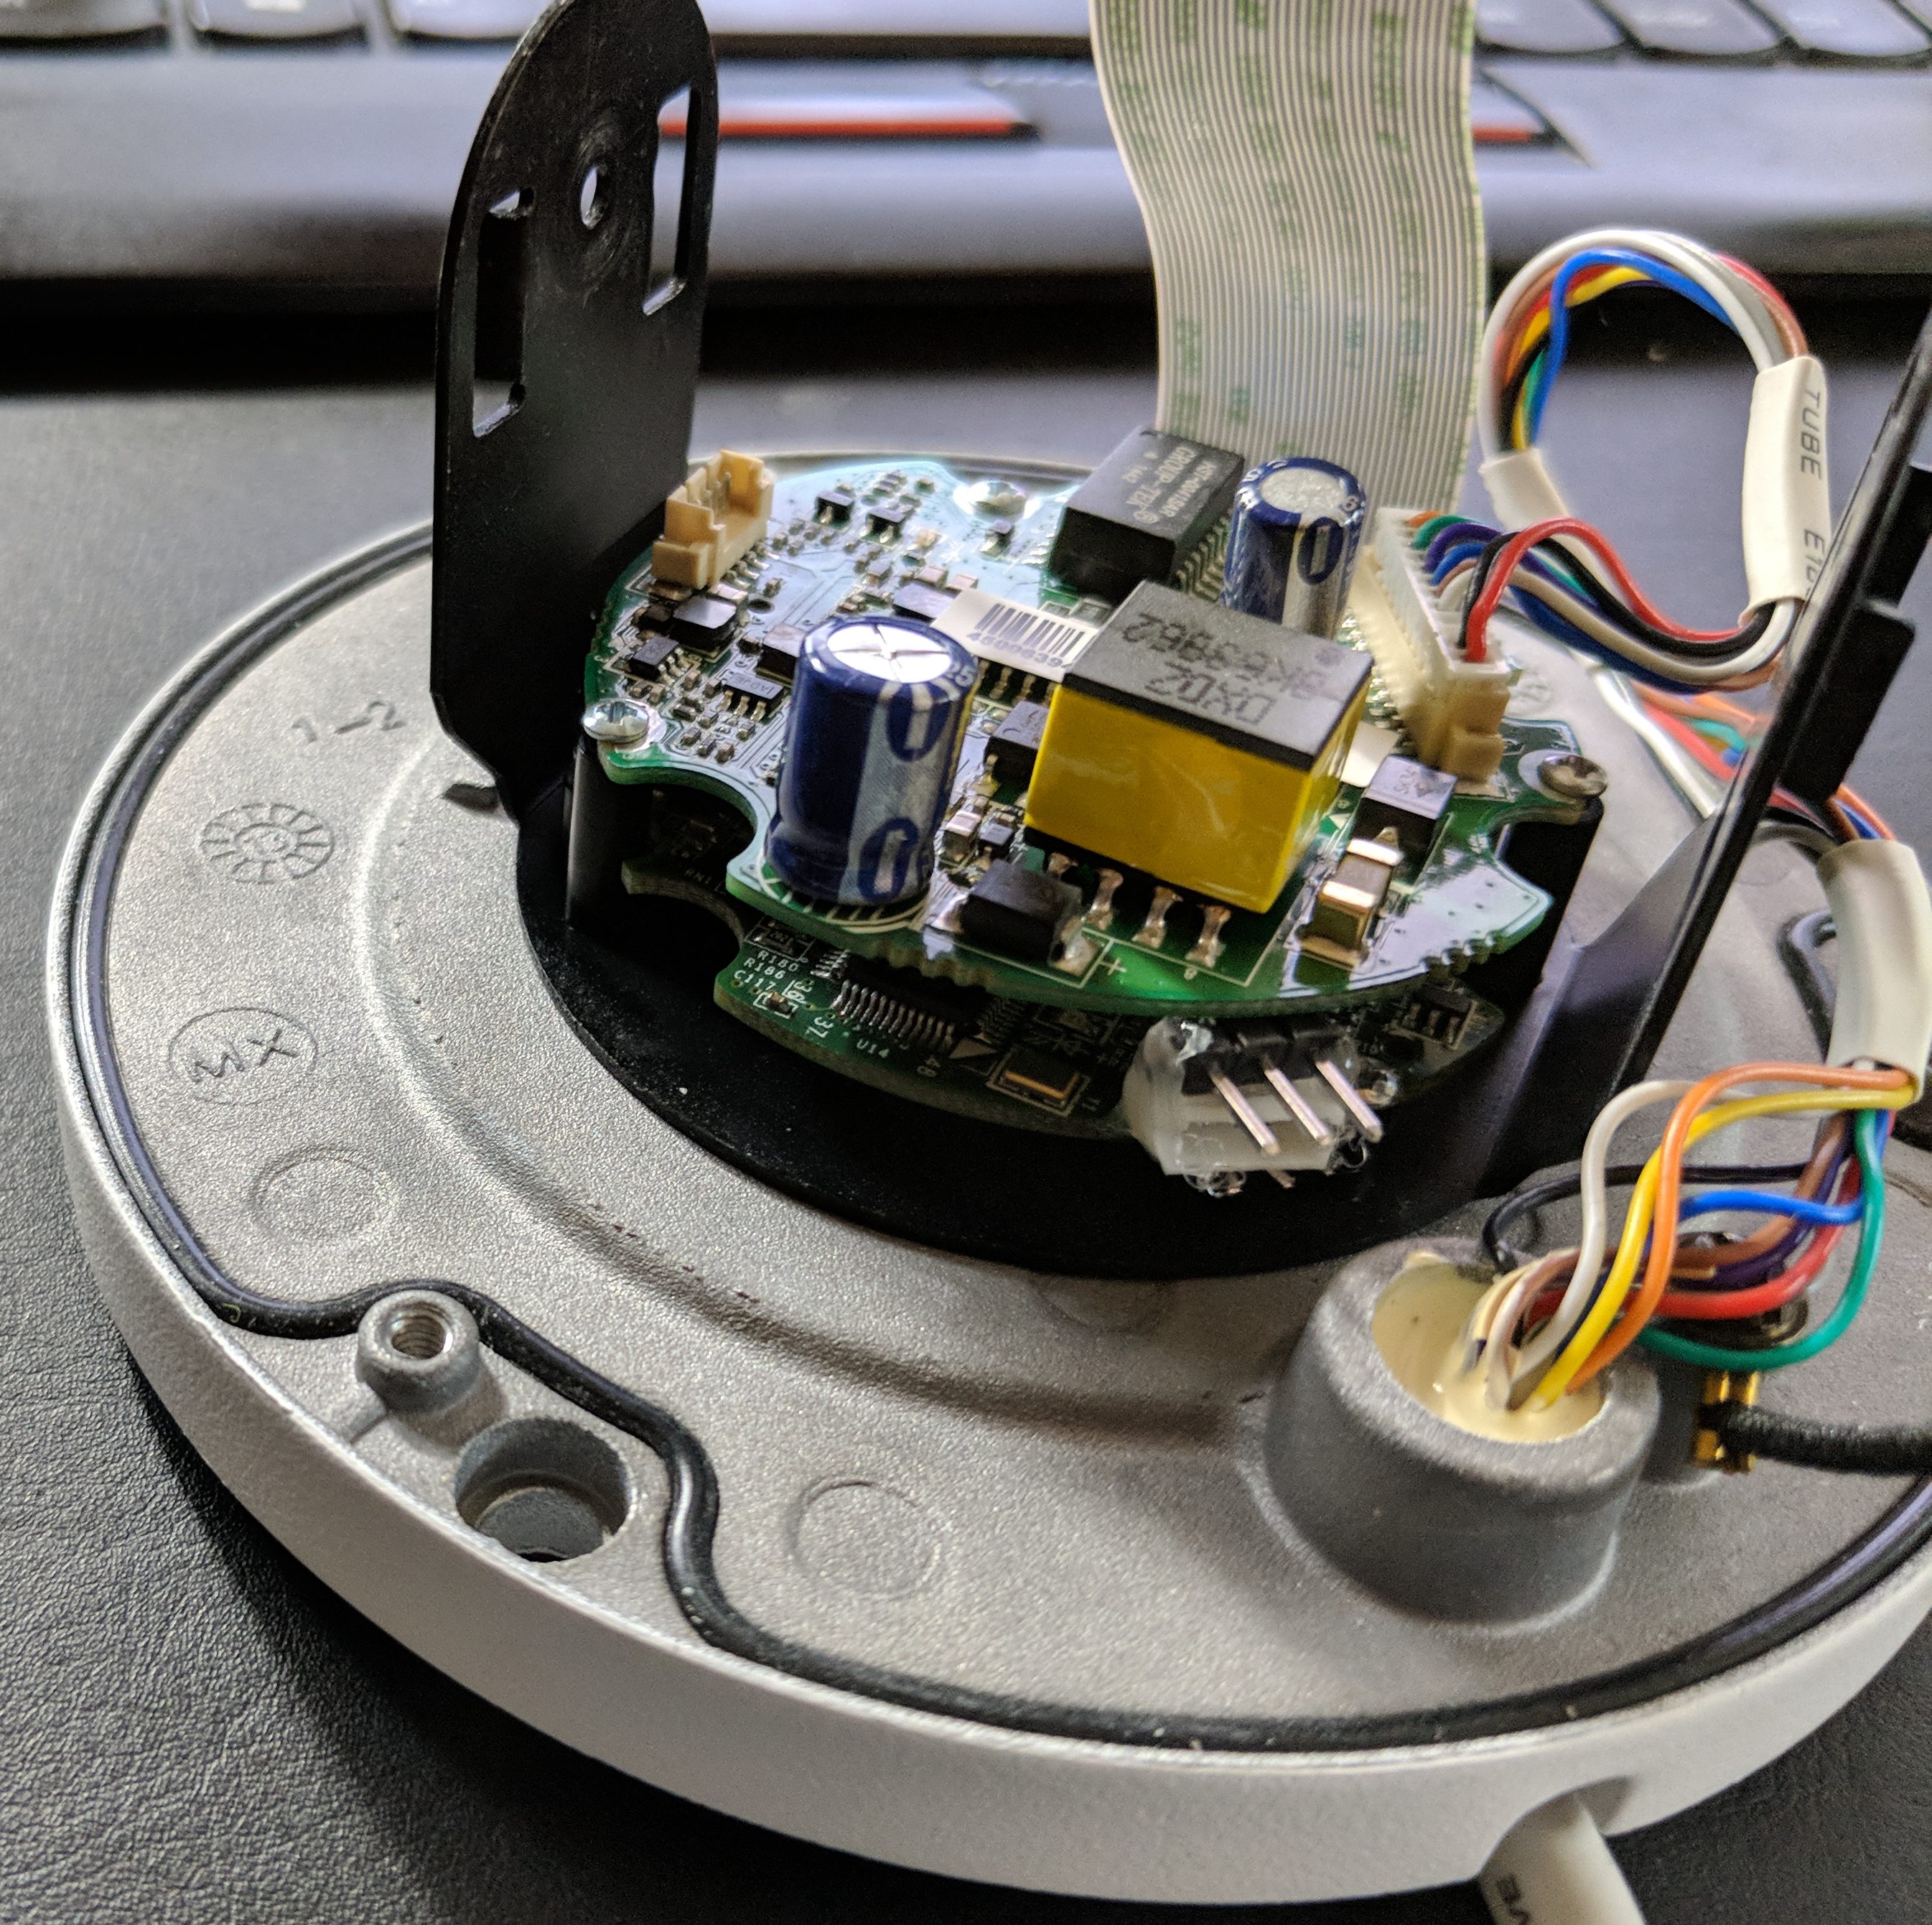 Hacking the hikvision: part 2